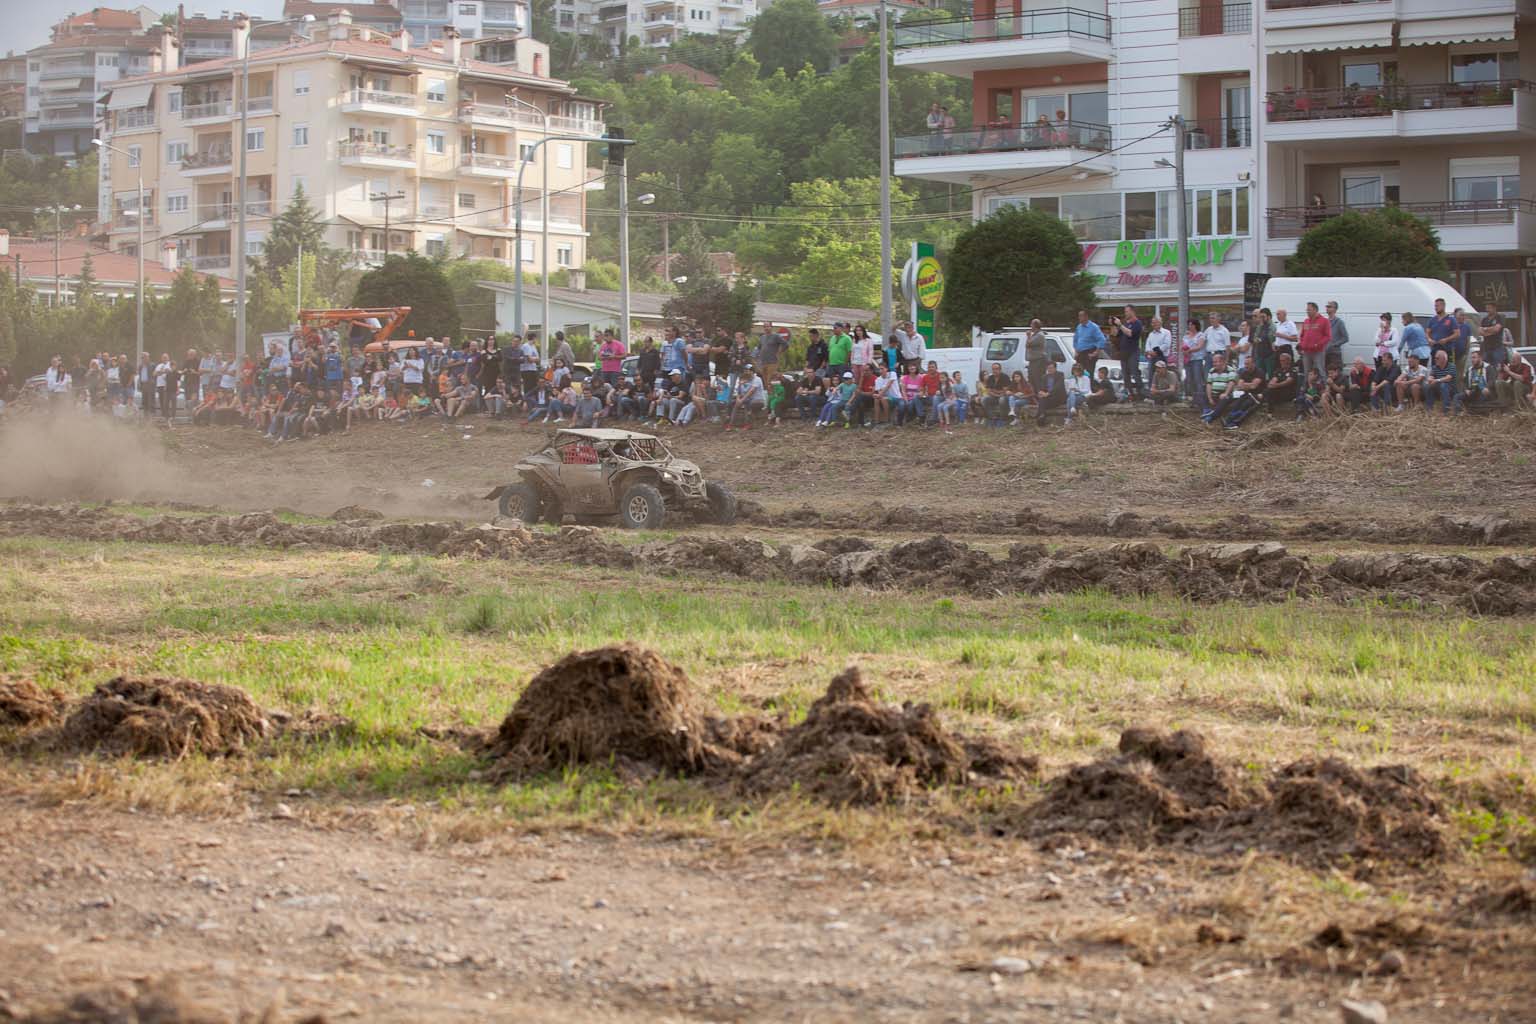 RALLY-OFFROAD-GREECE251